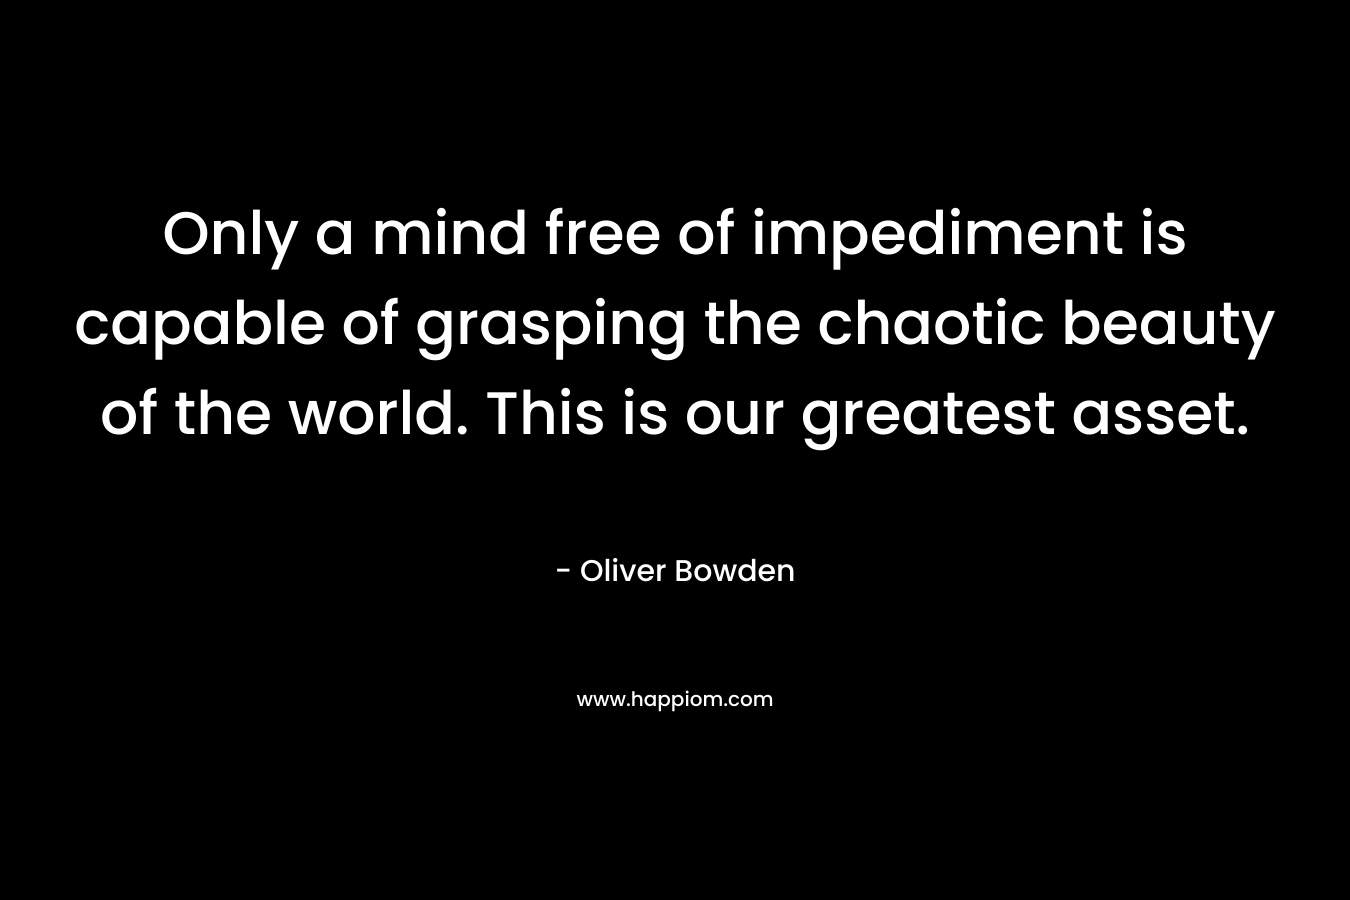 Only a mind free of impediment is capable of grasping the chaotic beauty of the world. This is our greatest asset. – Oliver Bowden